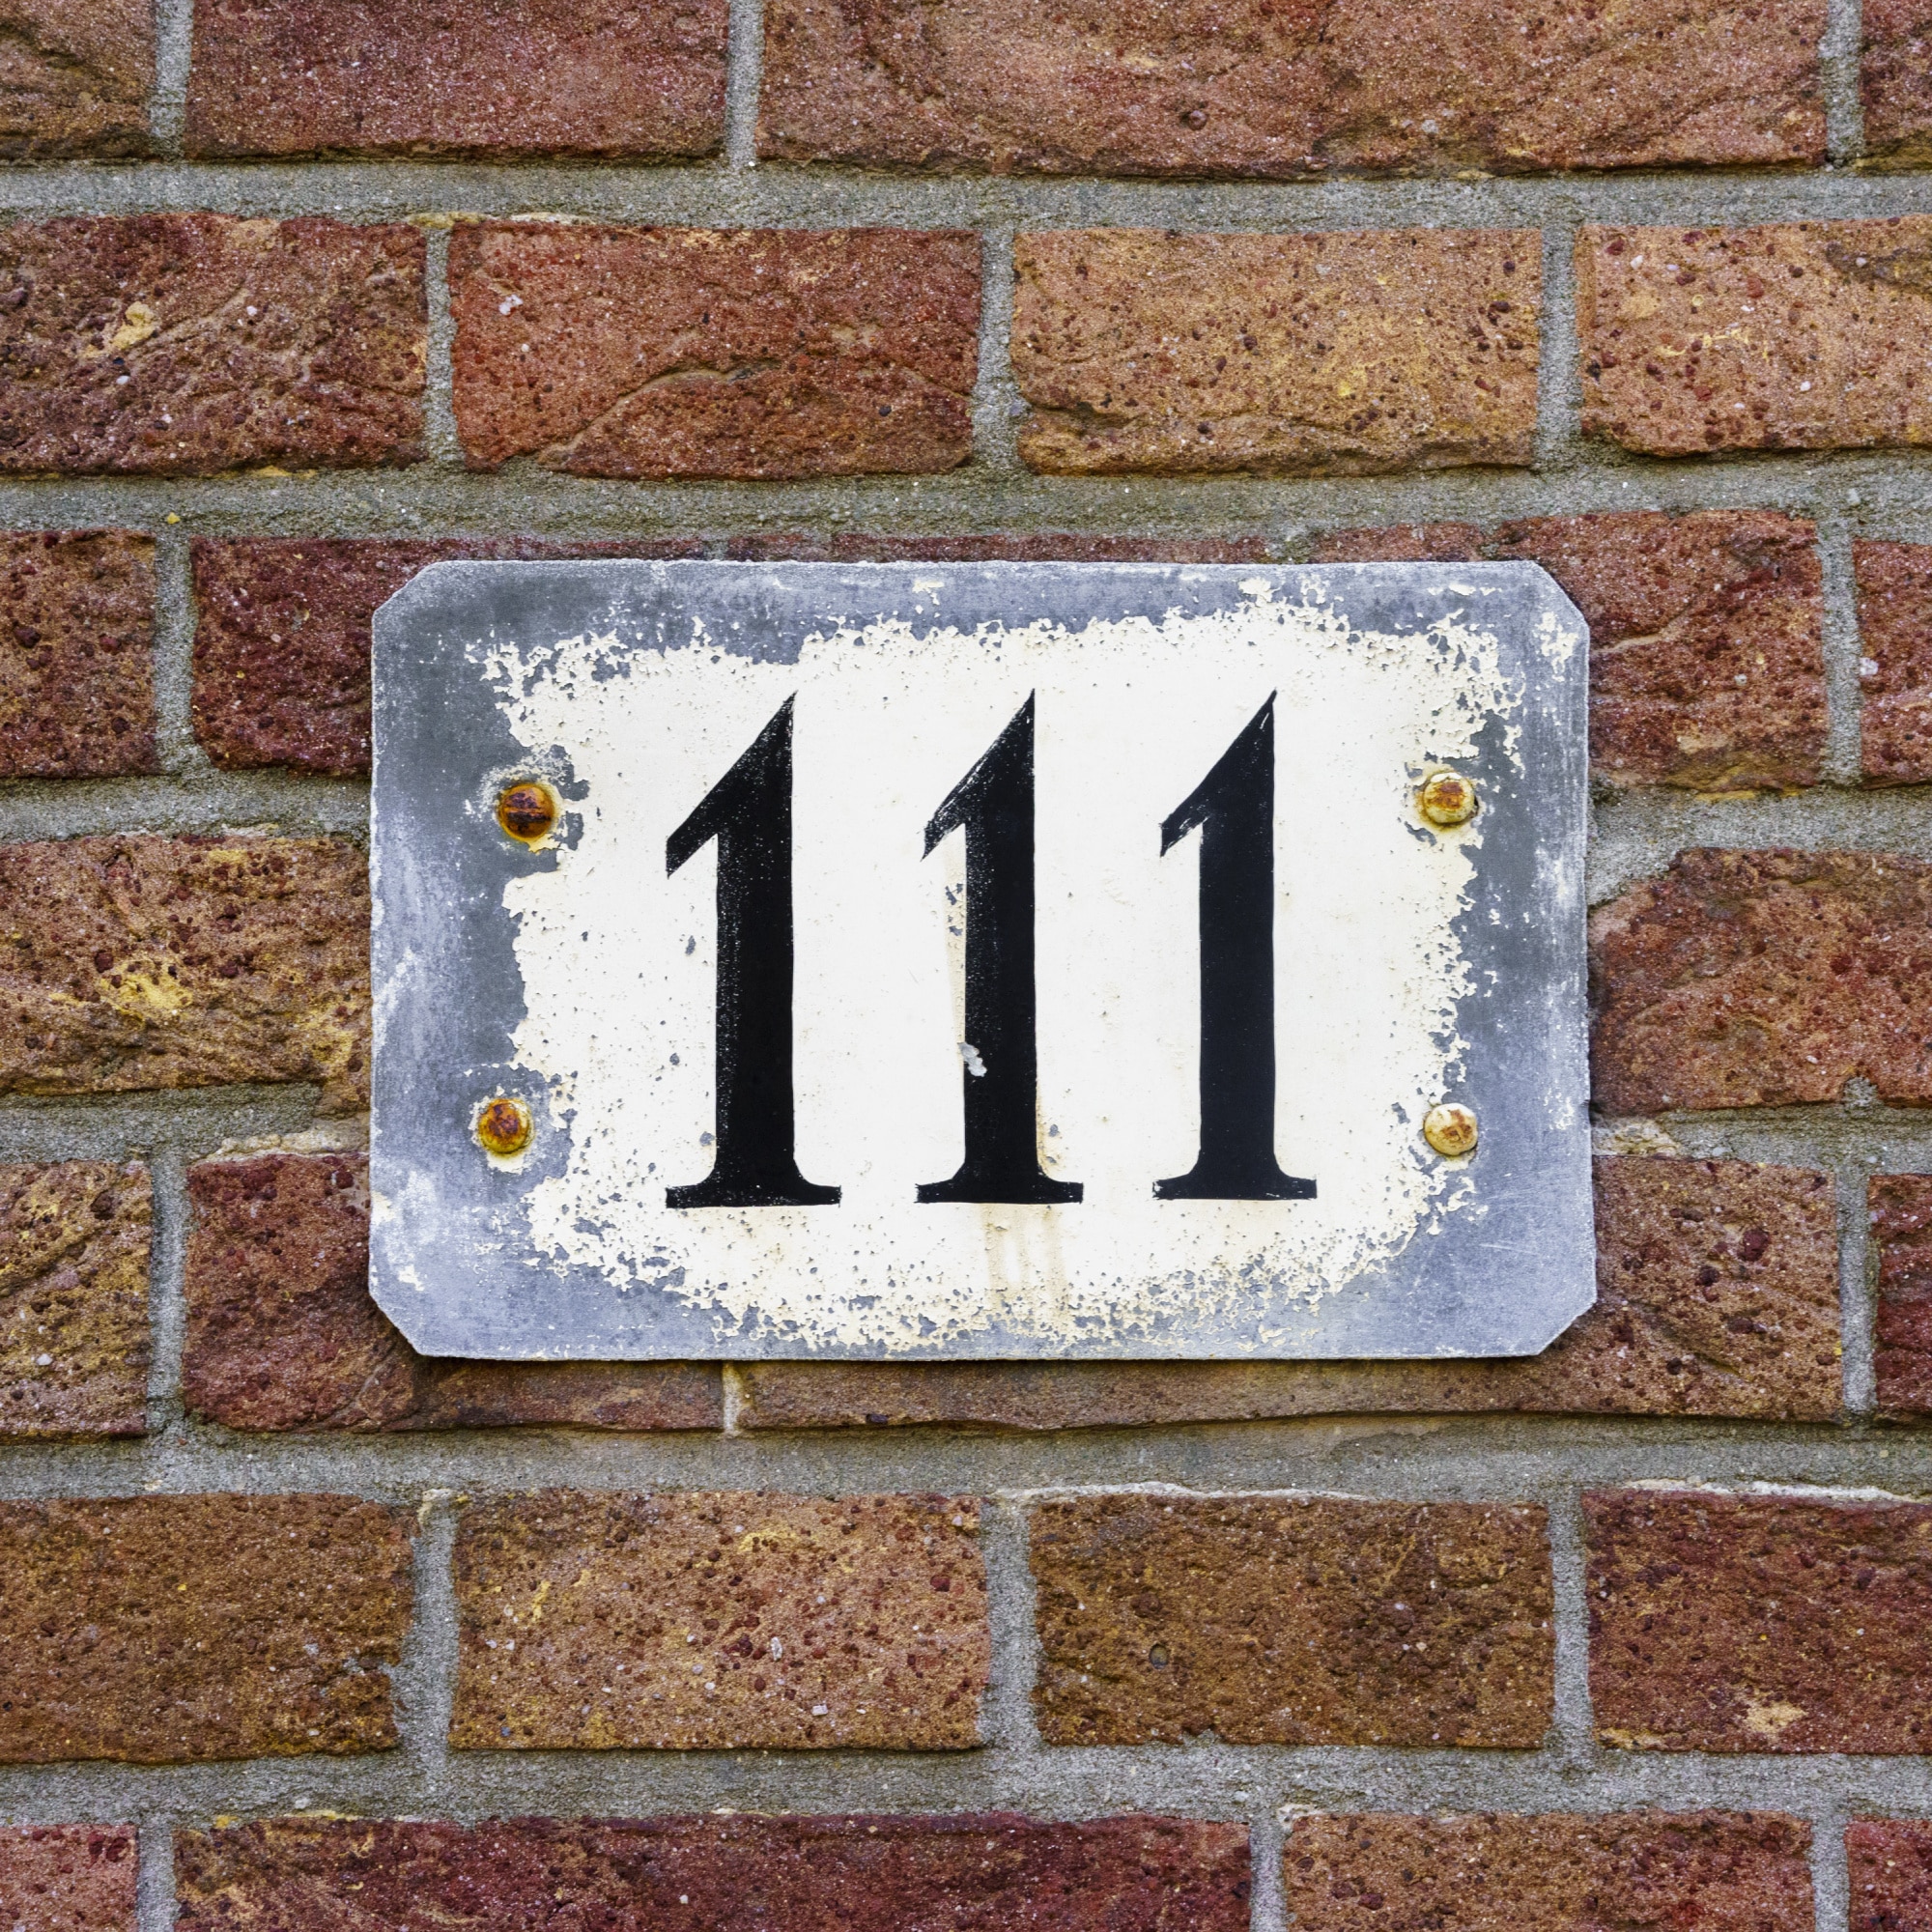 What Does Seeing 111 Repeatedly Mean?